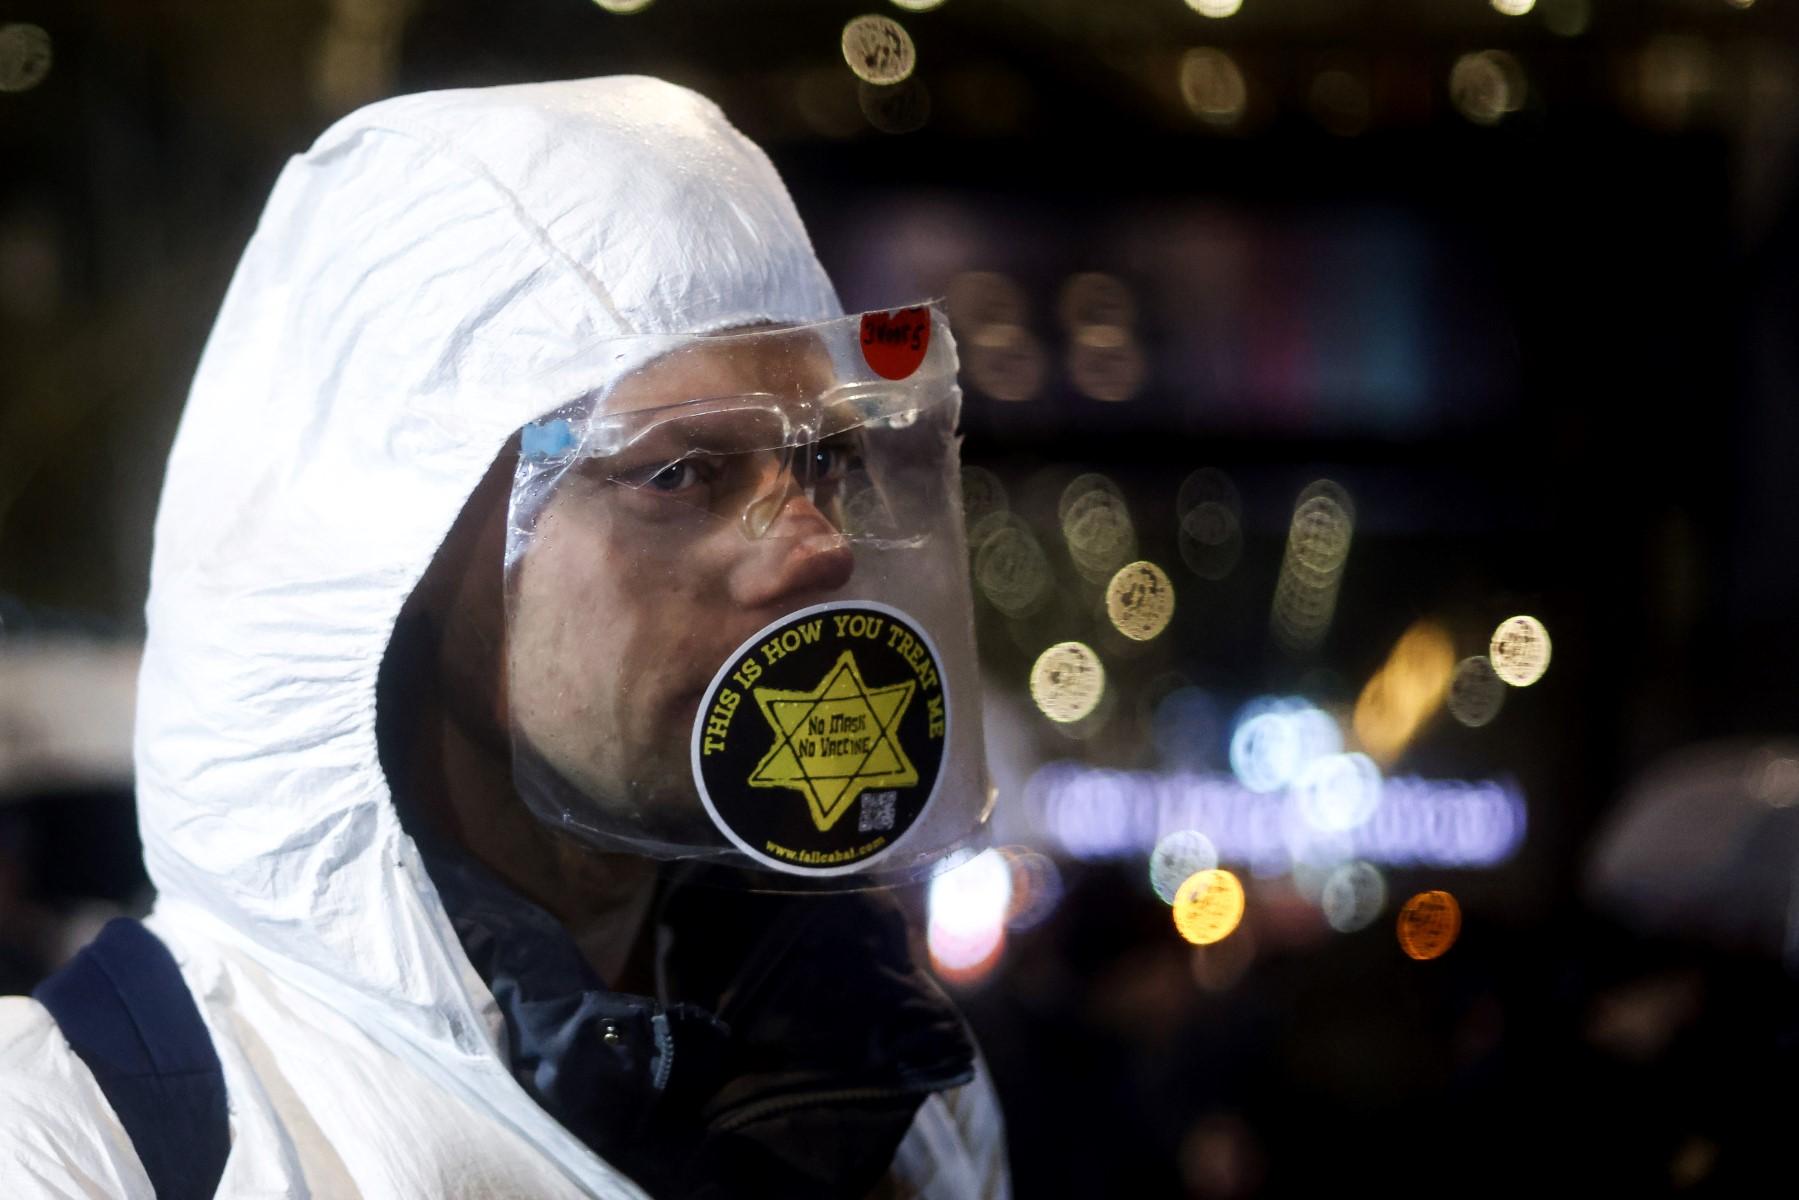 A demonstrator with a star of David takes part in a protest against new restrictions to curb the spread of Covid-19 outside the Ministry of Justice and Security in The Hague on Nov 26, 2021 amid the Covid-19 pandemic. Photo: AFP